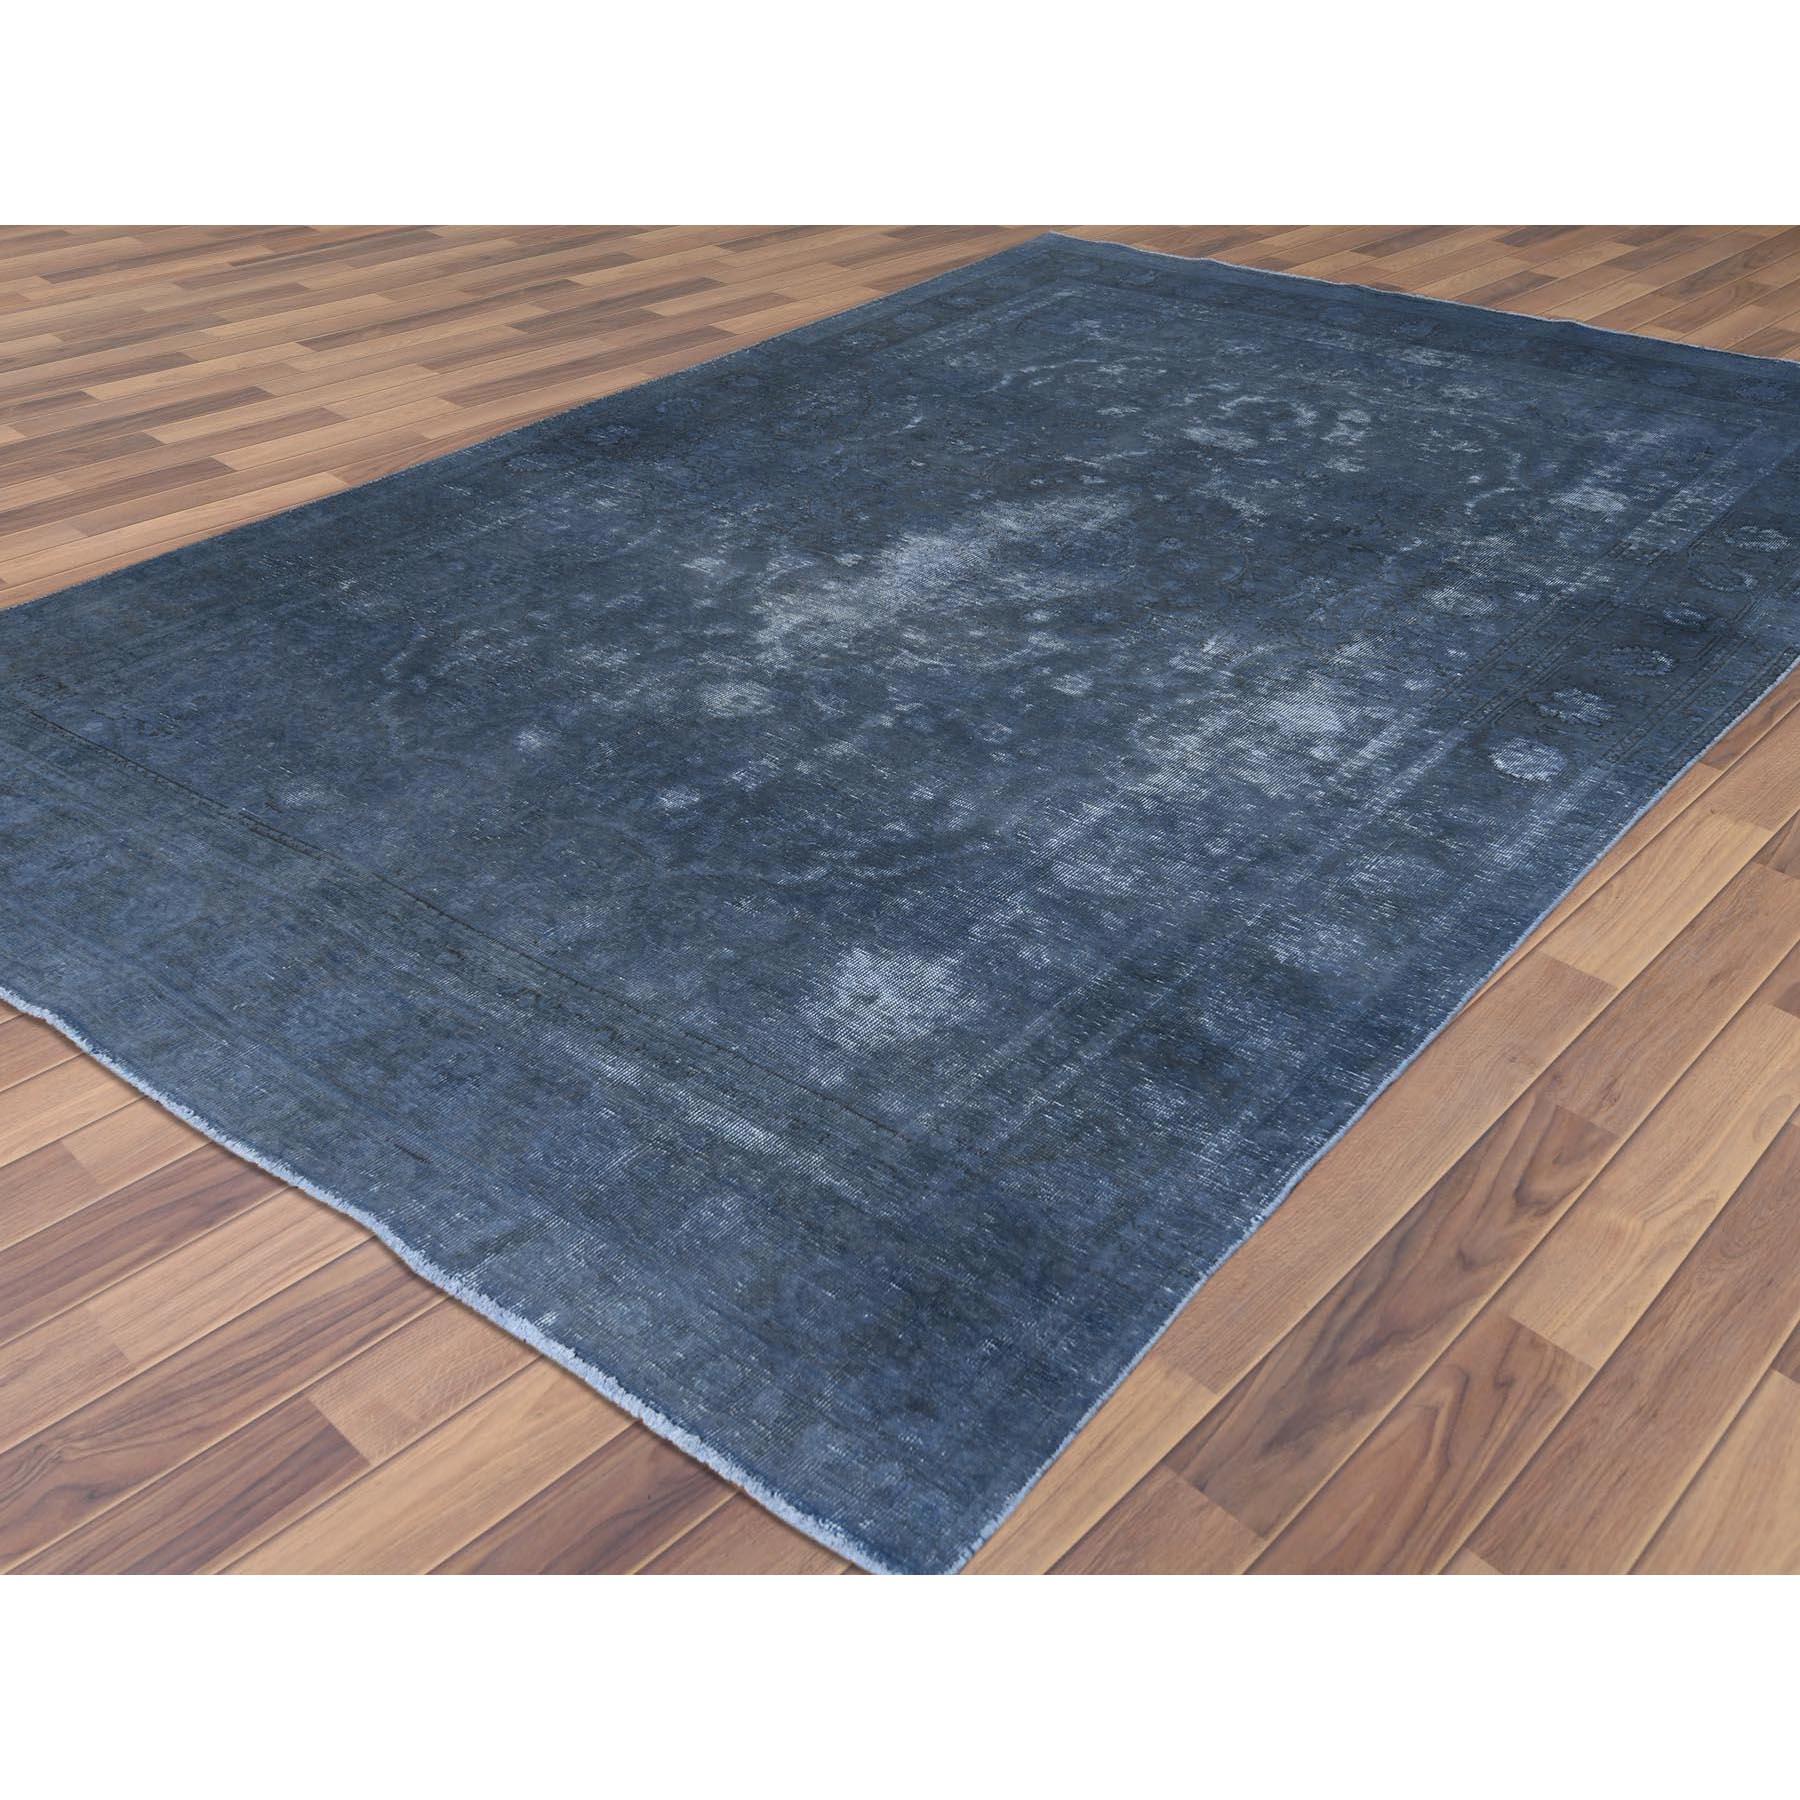 Distressed Worn Wool Hand Knotted Gray Vintage Overdyed Persian Tabriz Rug In Good Condition For Sale In Carlstadt, NJ